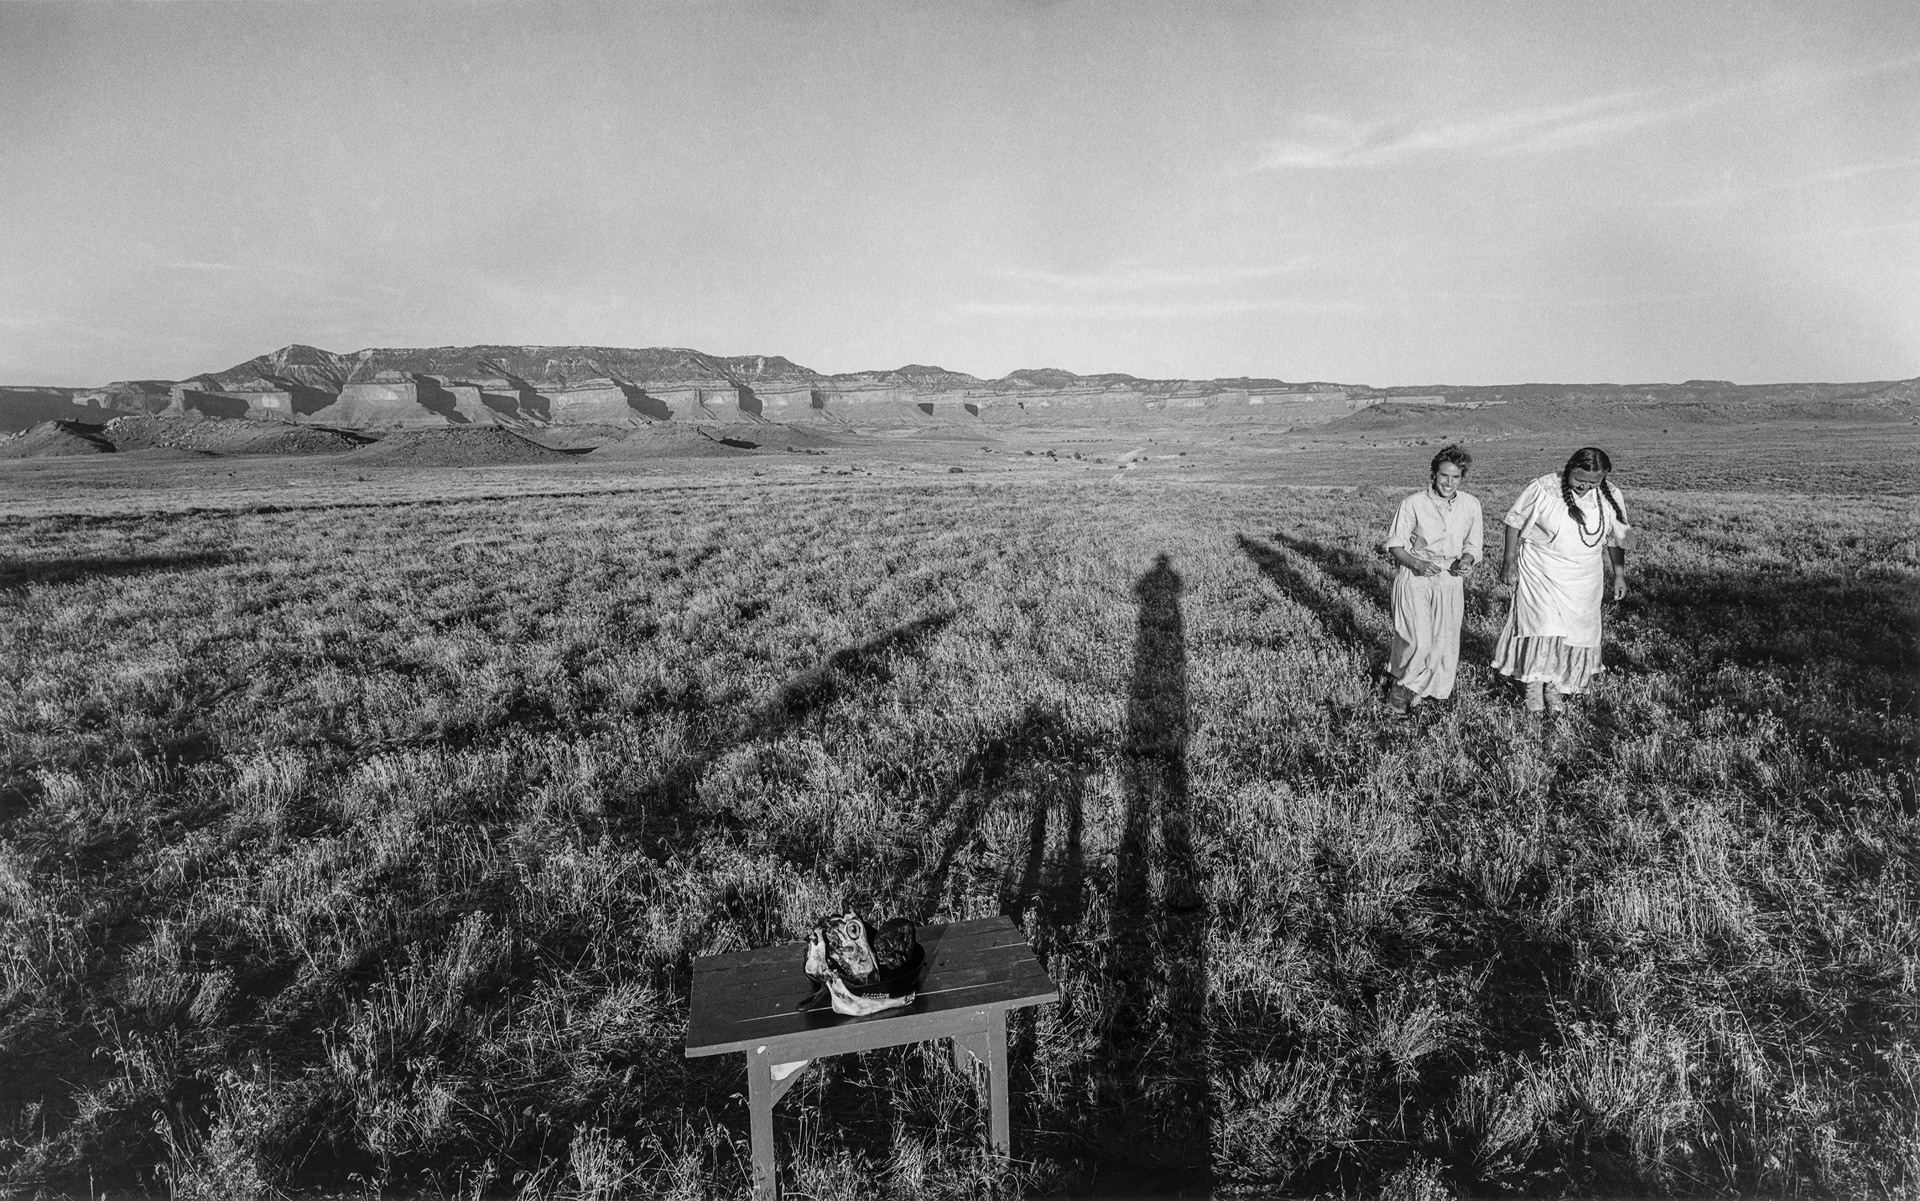 After the Cleansing Sweat Ceremony and Feast, Goat Head on Table, Lukachulai, Arizona by Lawrence McFarland